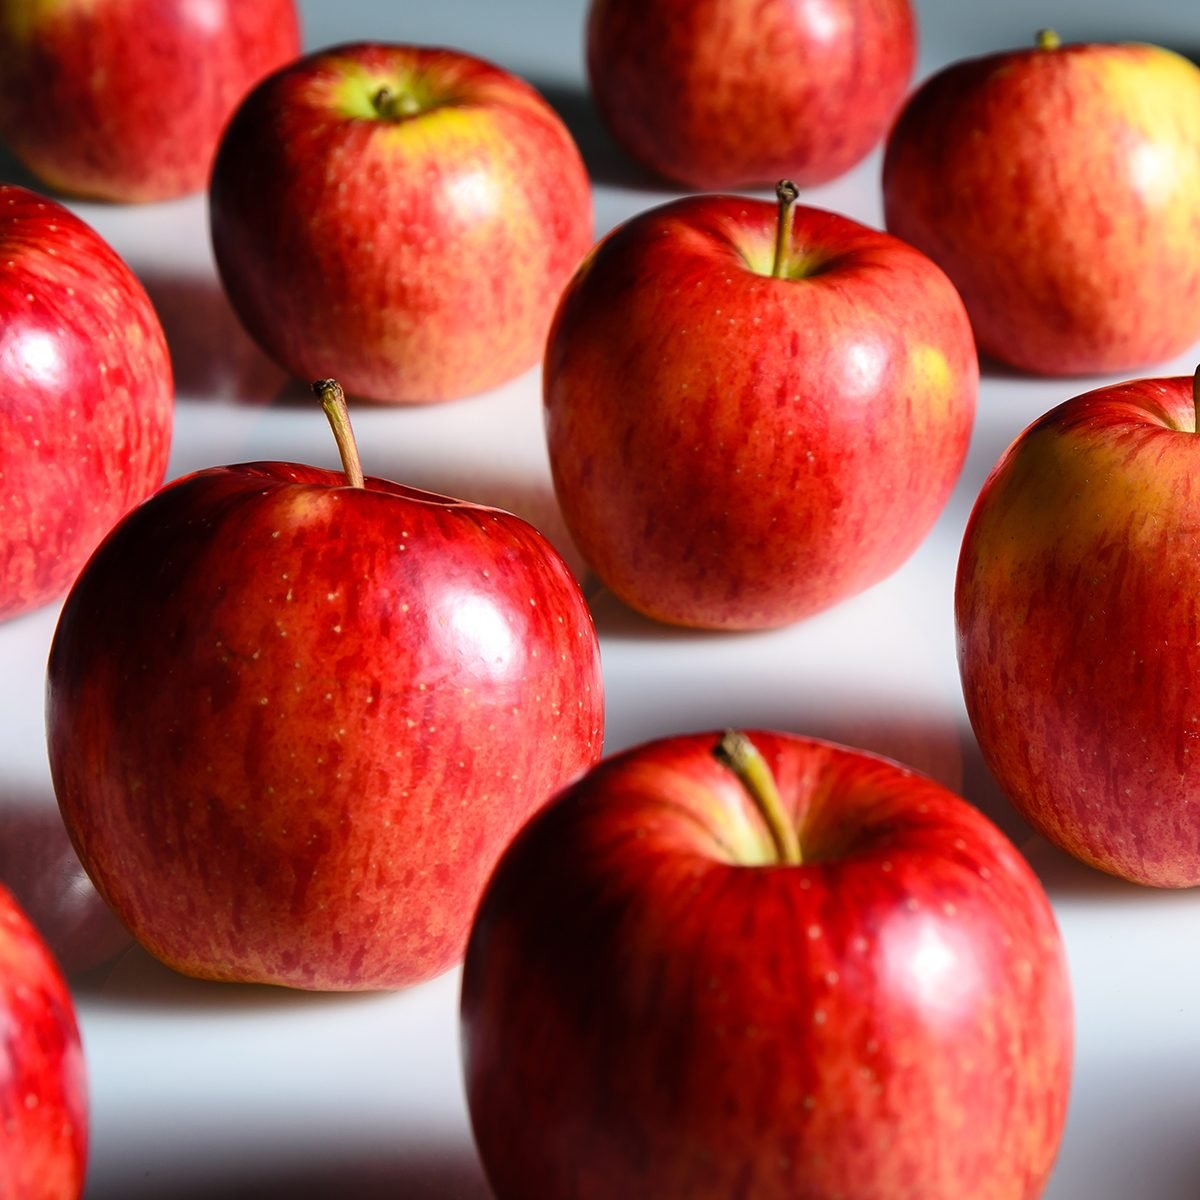 Big Envy apple harvest expected for holiday season - Organic Grower